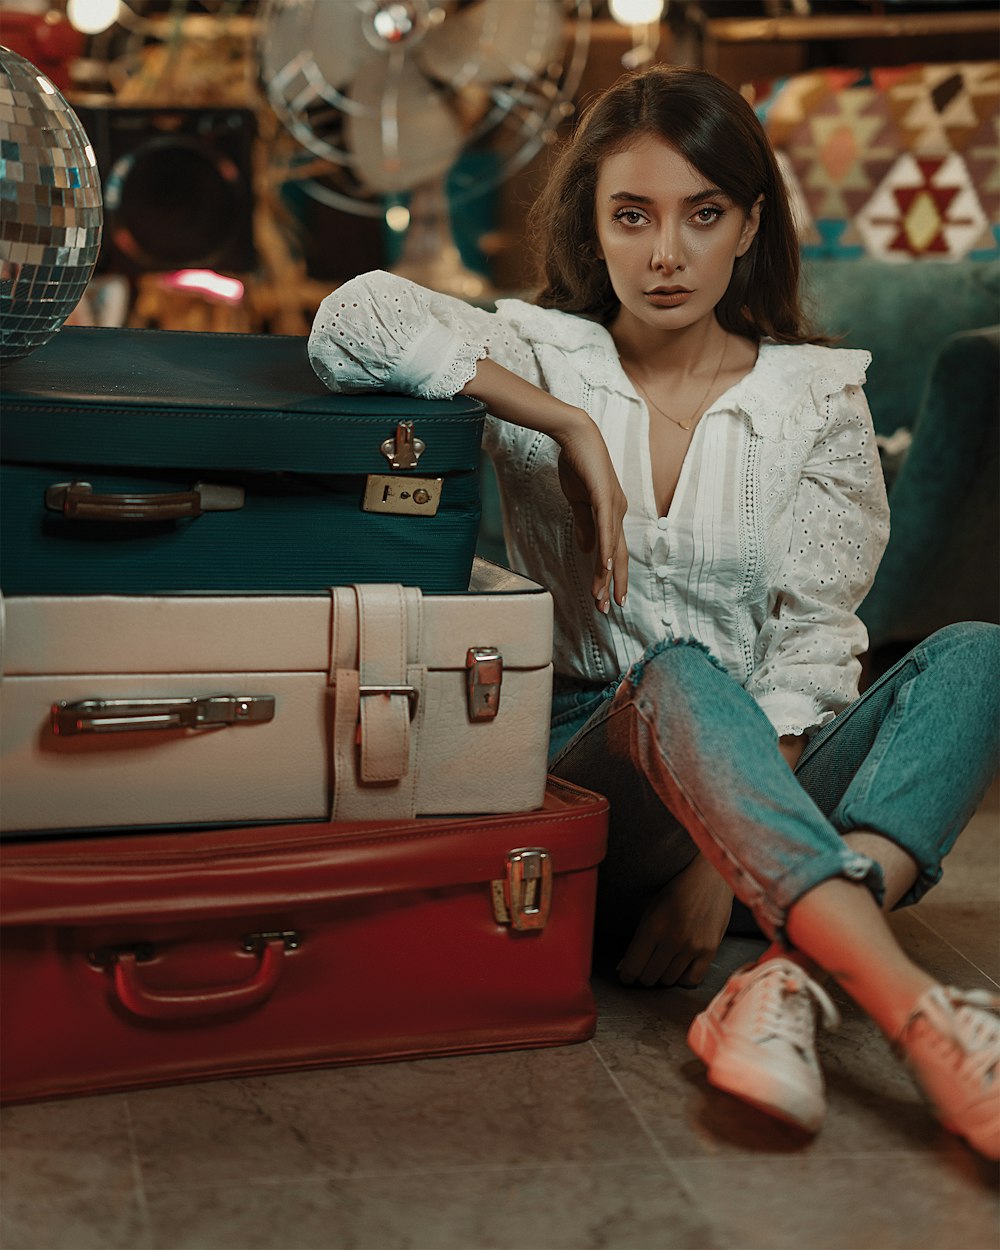 a woman sitting on the floor next to a pile of suitcases